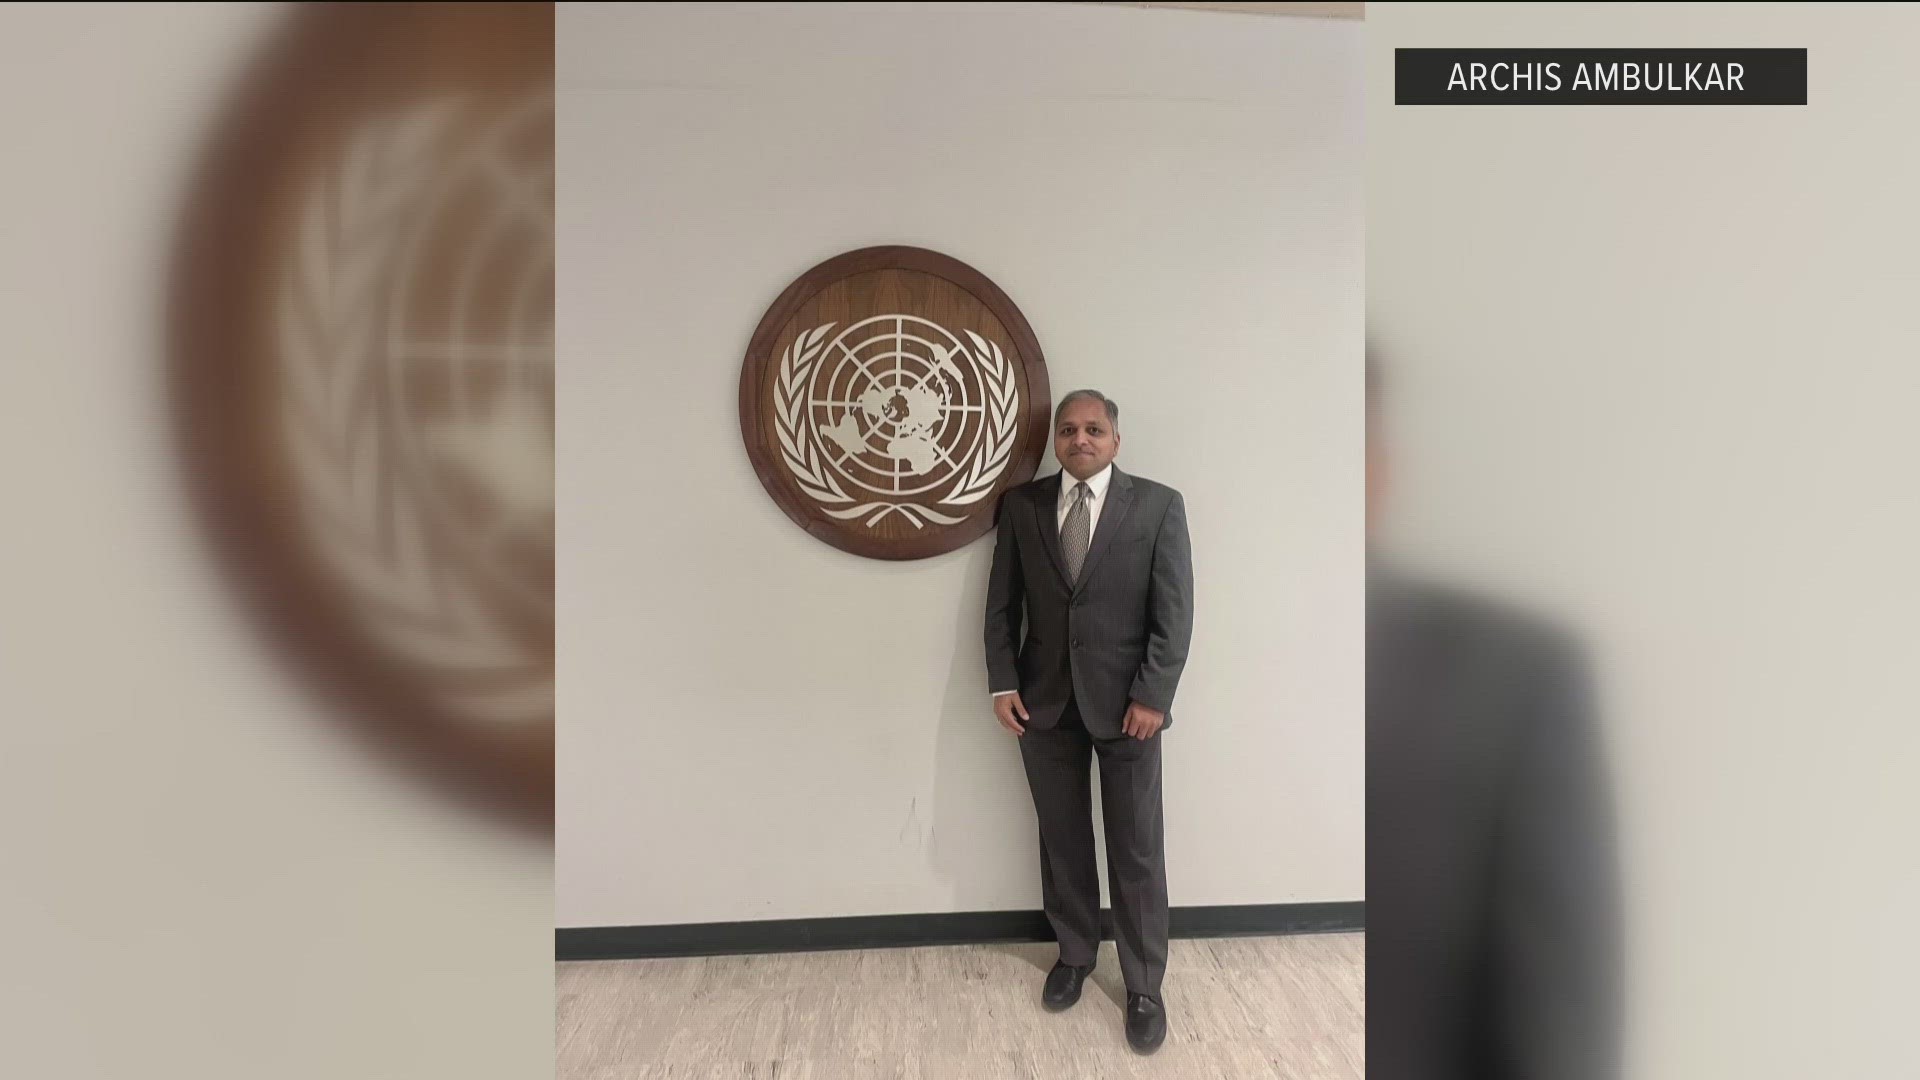 Archis Ambulkar recently represented the United States at the UN for the Third World Ocean Assessment program.